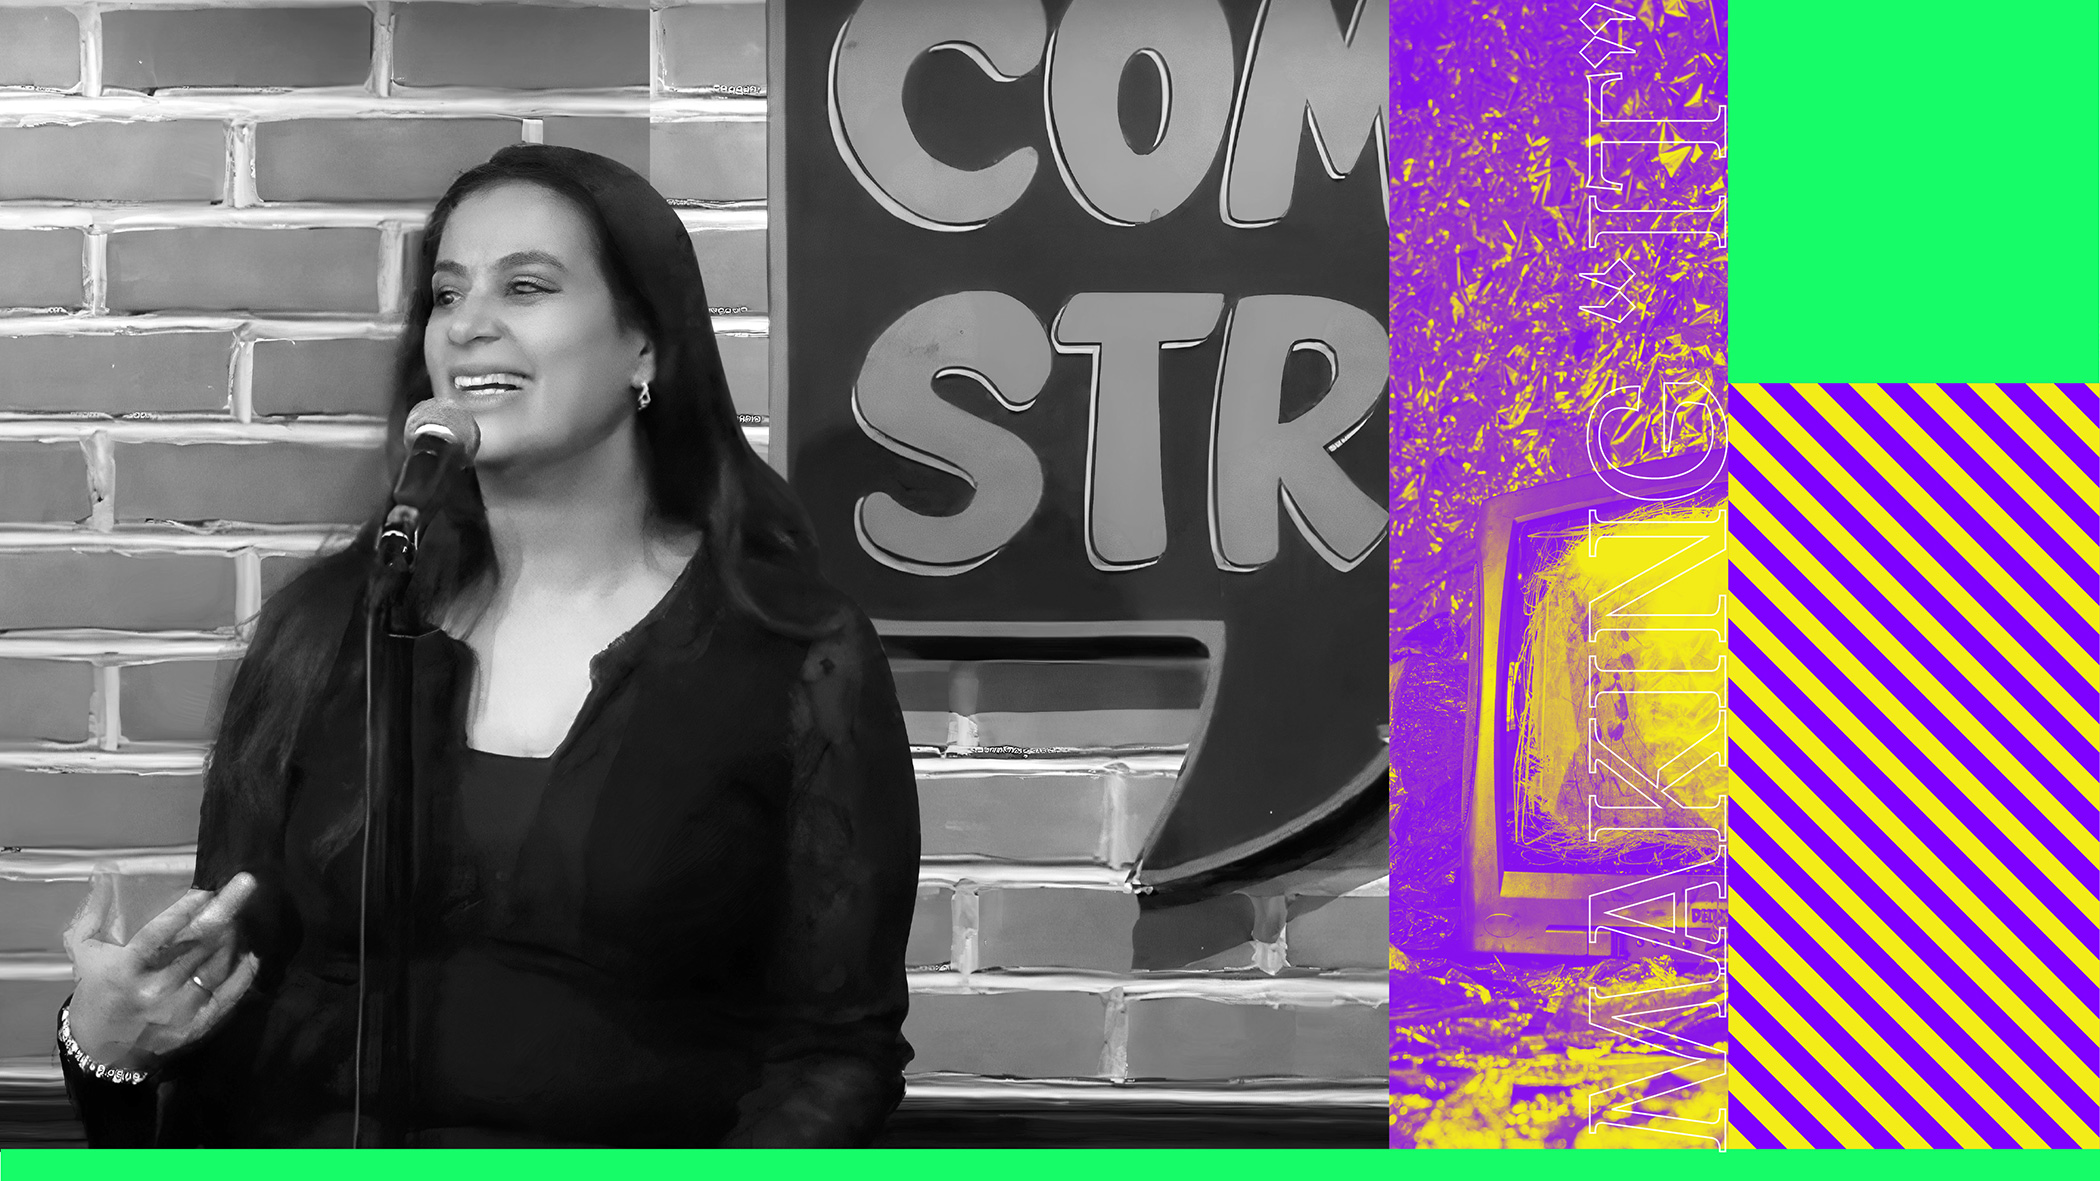 A collage featuring an image of Maysoon Zayid performing at a comedy club